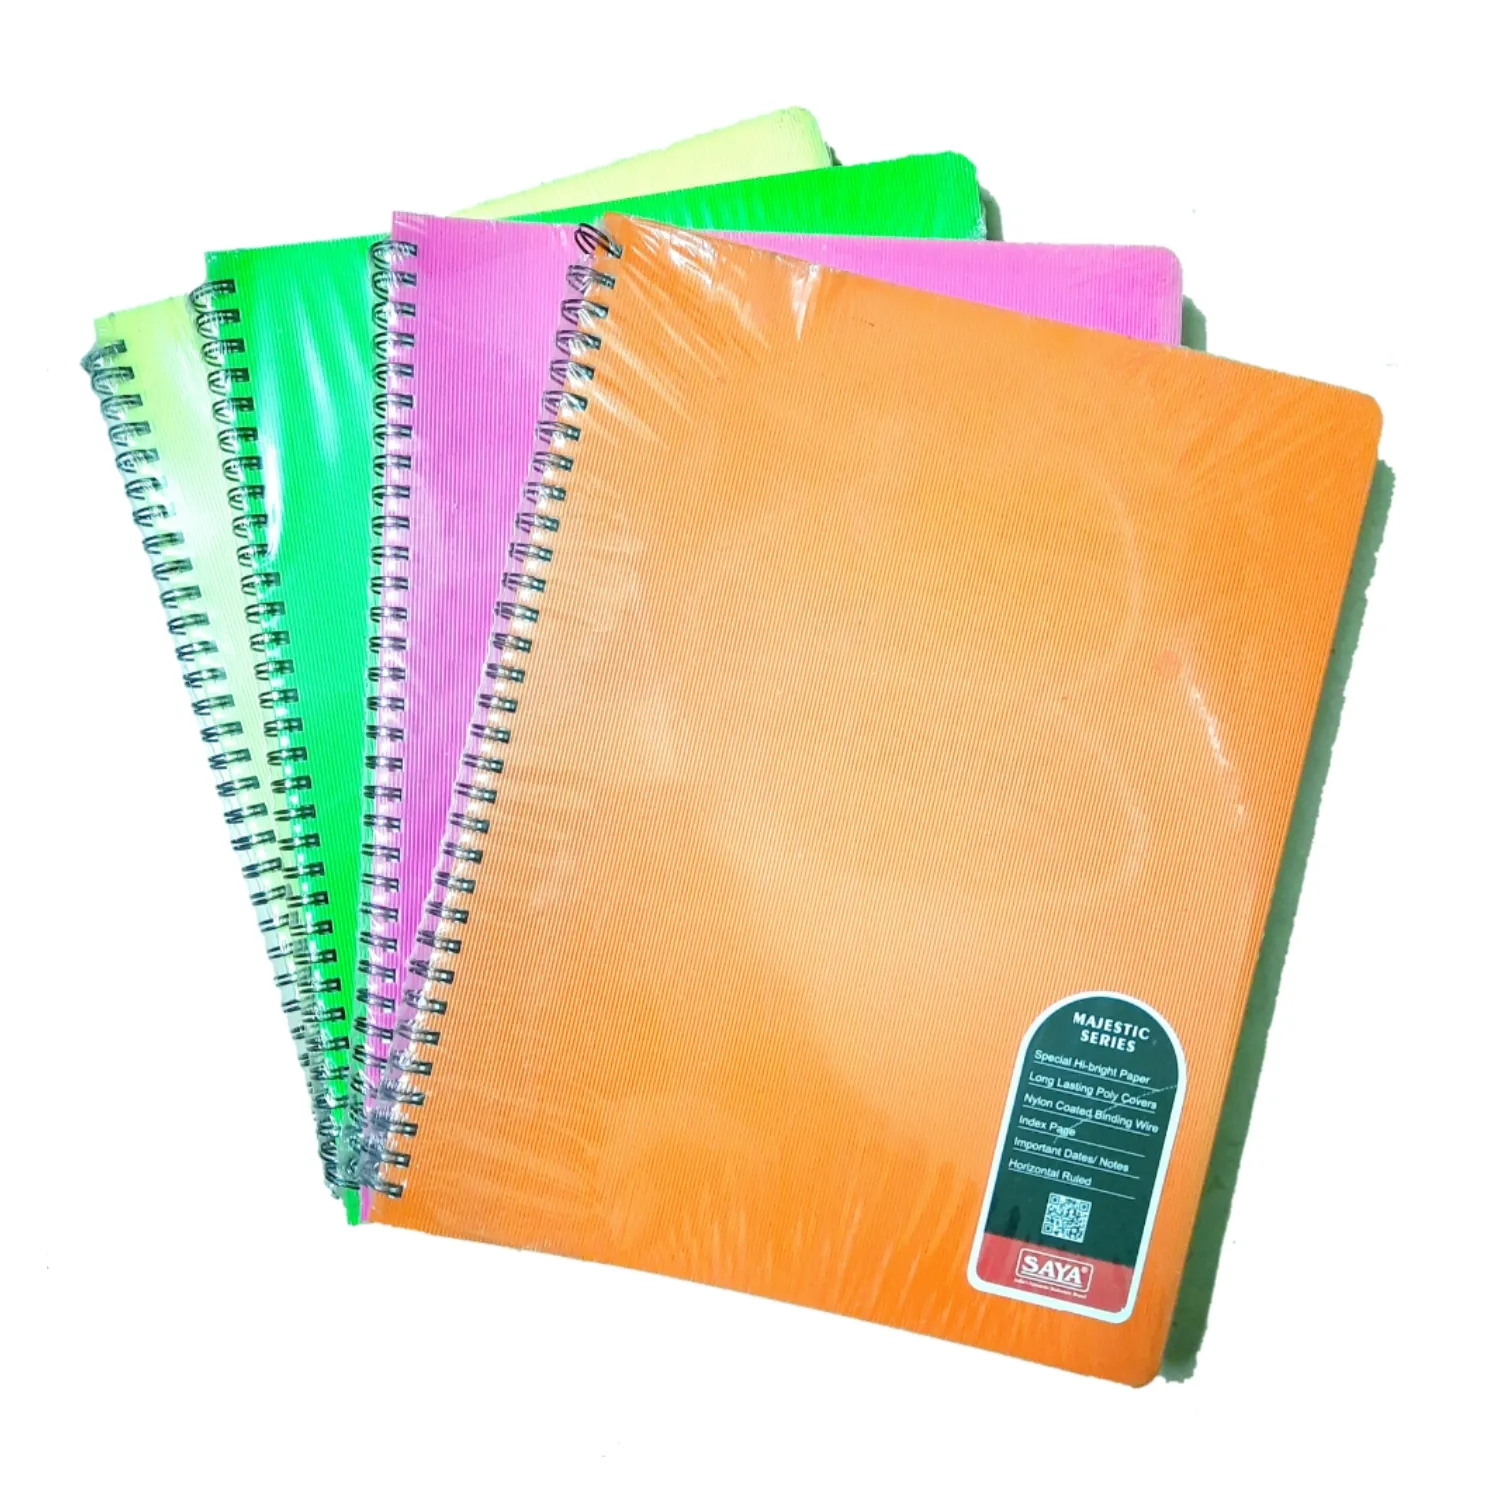 Saya Spiral Notebook, Majestic Series, Single Line, 160 Pages, 27.9 X 21.6 cm, Pack of 1